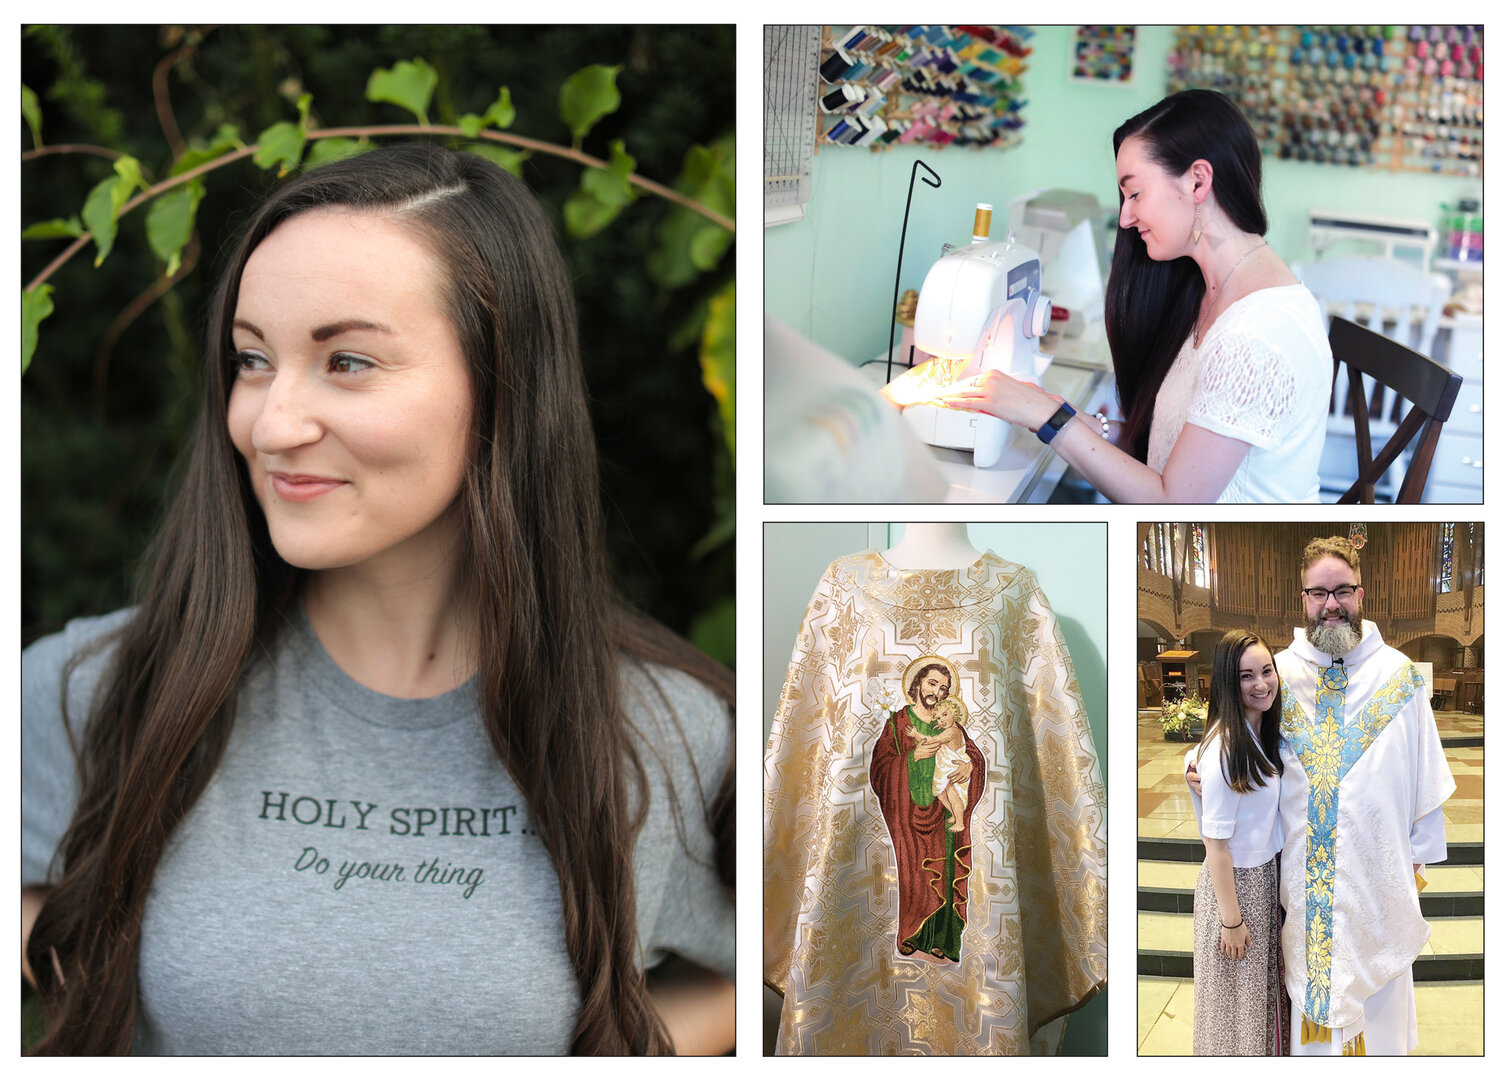 Emily Boni, a parishioner of St. Joseph Church in Woonsocket, is a seamstress using her skills for good by working with priests to design beautiful vestments for their ordination day, first Masses and other Holy Masses at the altar. 

Boni is also working toward the opening of her new Catholic business venture designing clothing (and more) with inspired messages.

 Above, vestments designed and prepared for Father Francis McCarty, O.S.B., campus minister at St. Anselm University.